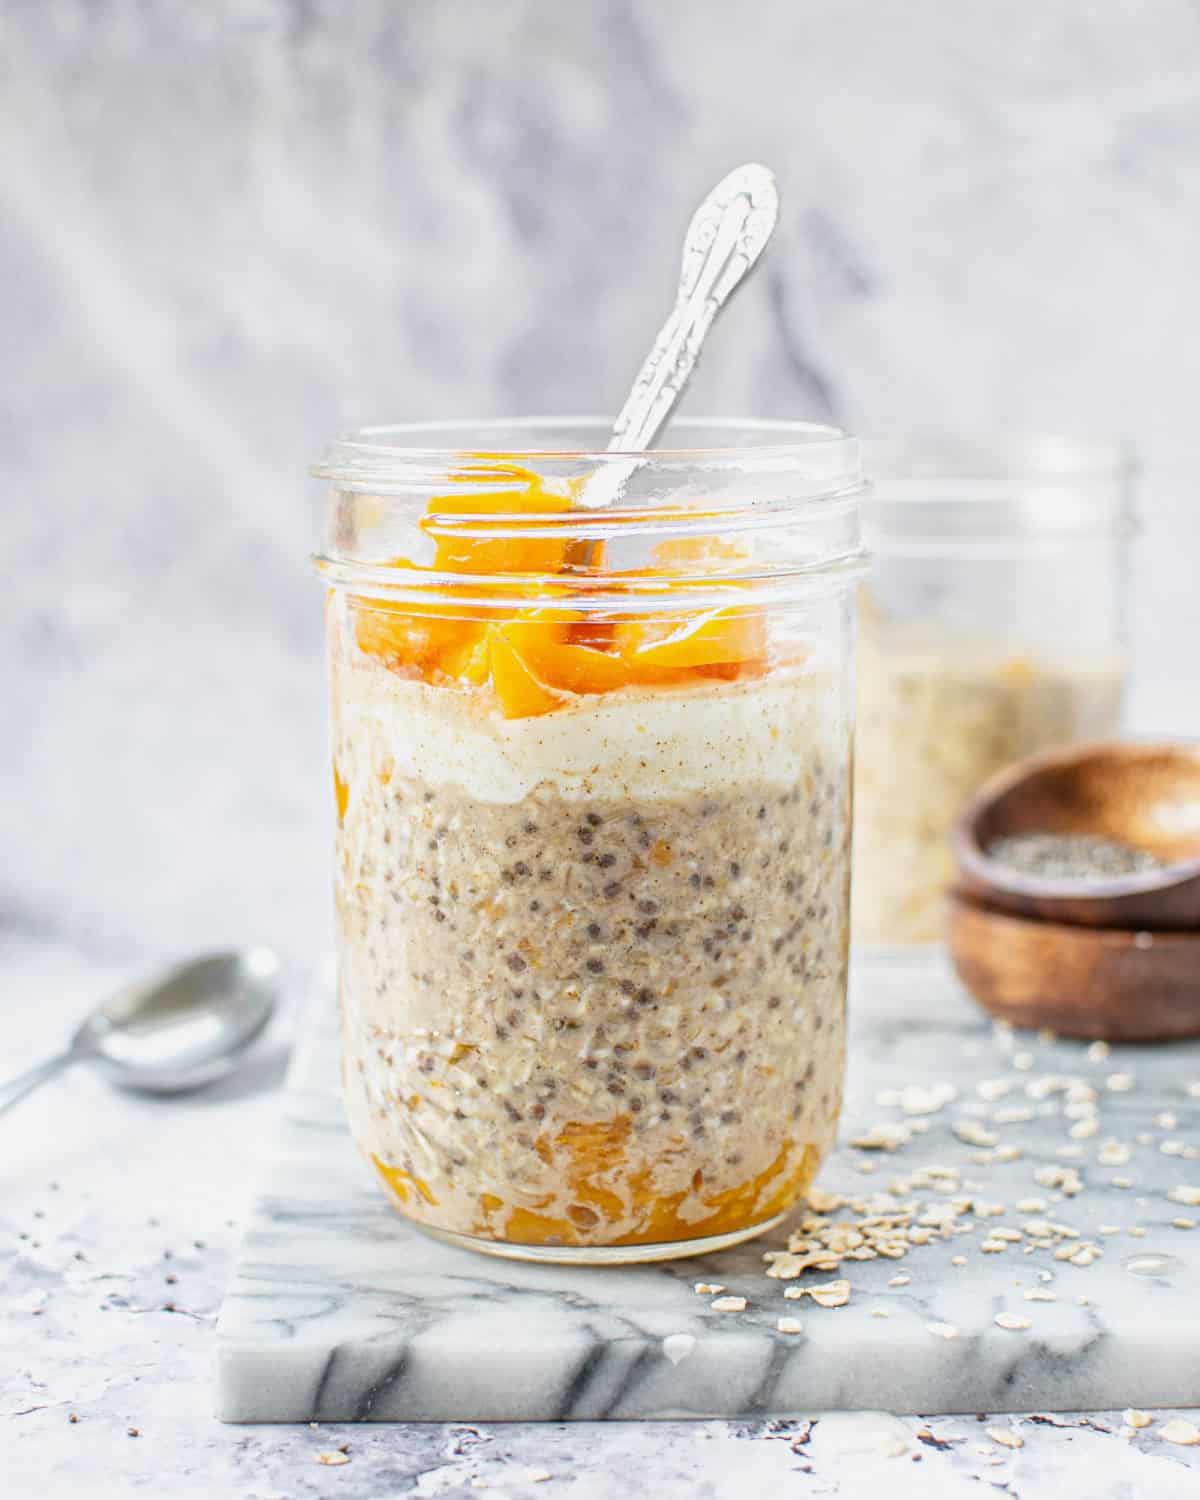 Overnight oats in a glass with a spoon in it.